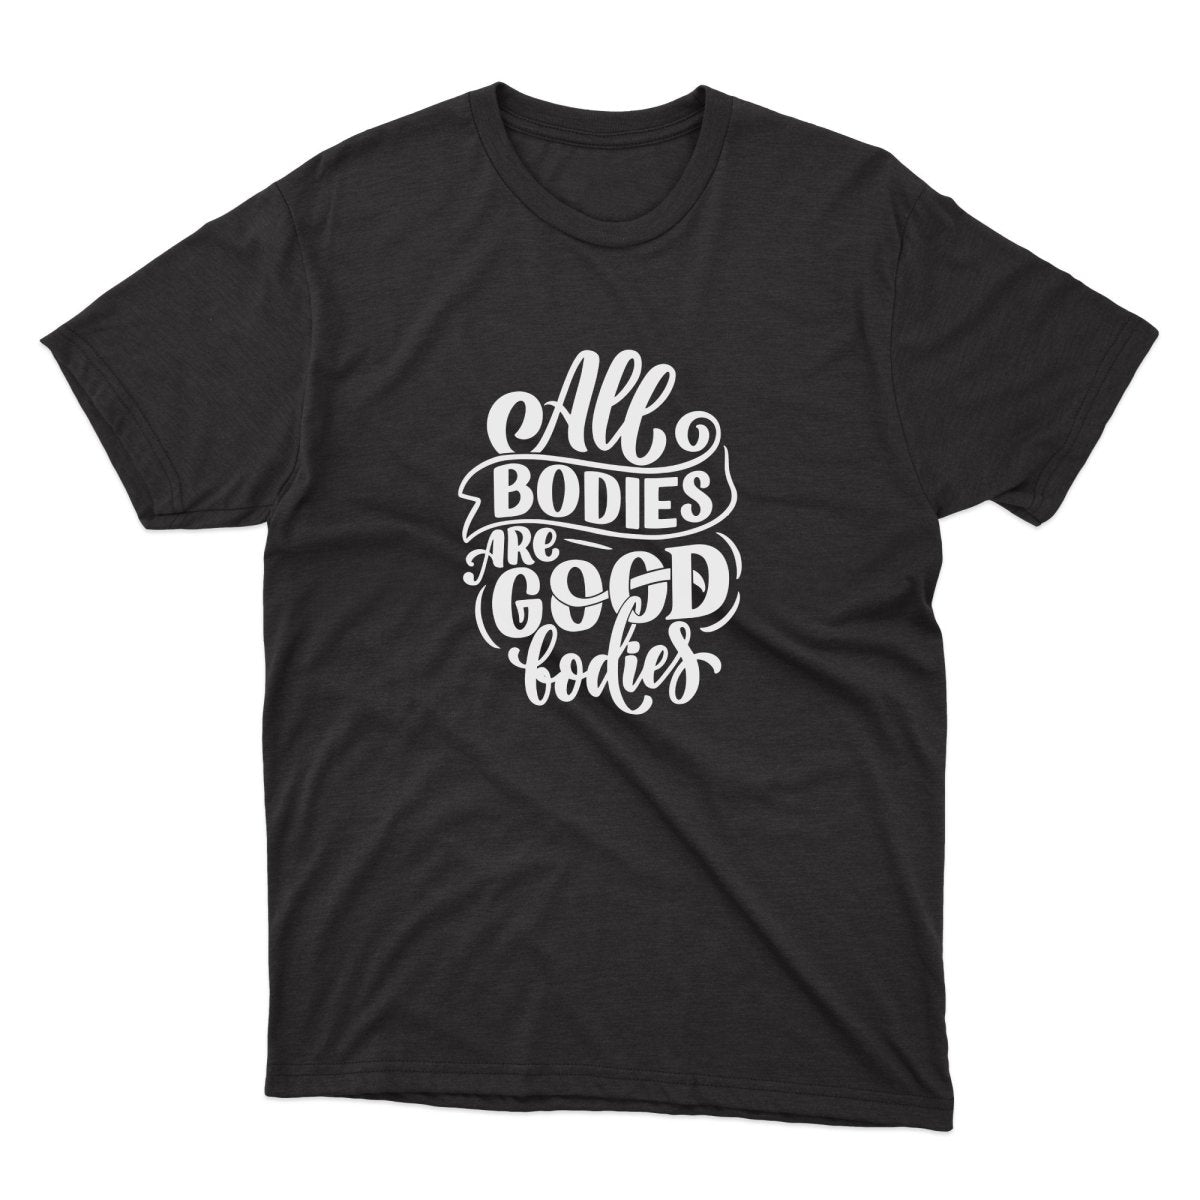 All Bodies Are Good Bodies Shirt - stickerbullAll Bodies Are Good Bodies ShirtShirtsPrintifystickerbull10774621979179396113BlackSa black t - shirt that says all bodies are good bodies